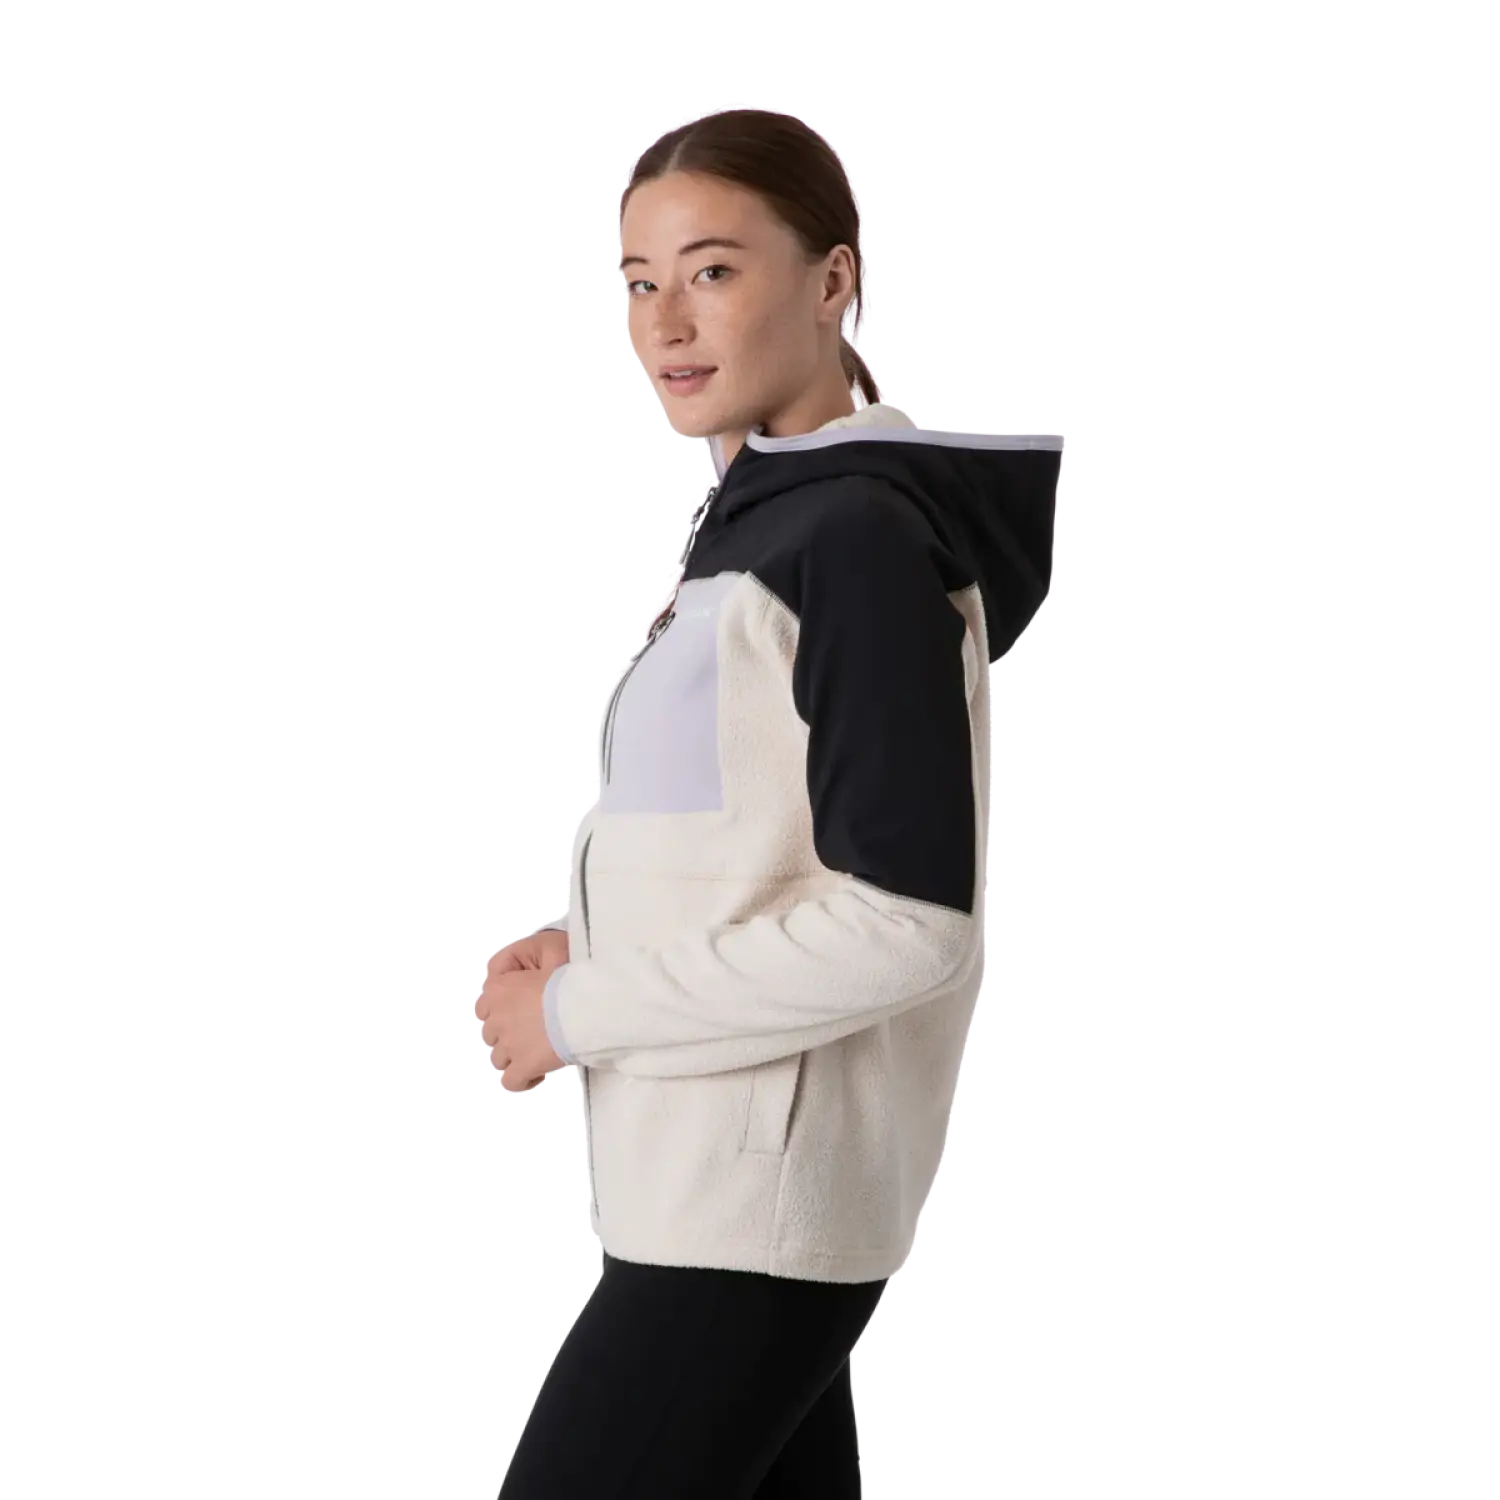 Cotopaxi Women's Abrazo Hooded Full Zip Jacket shown in the Black and Cream color option. Side view, on model.